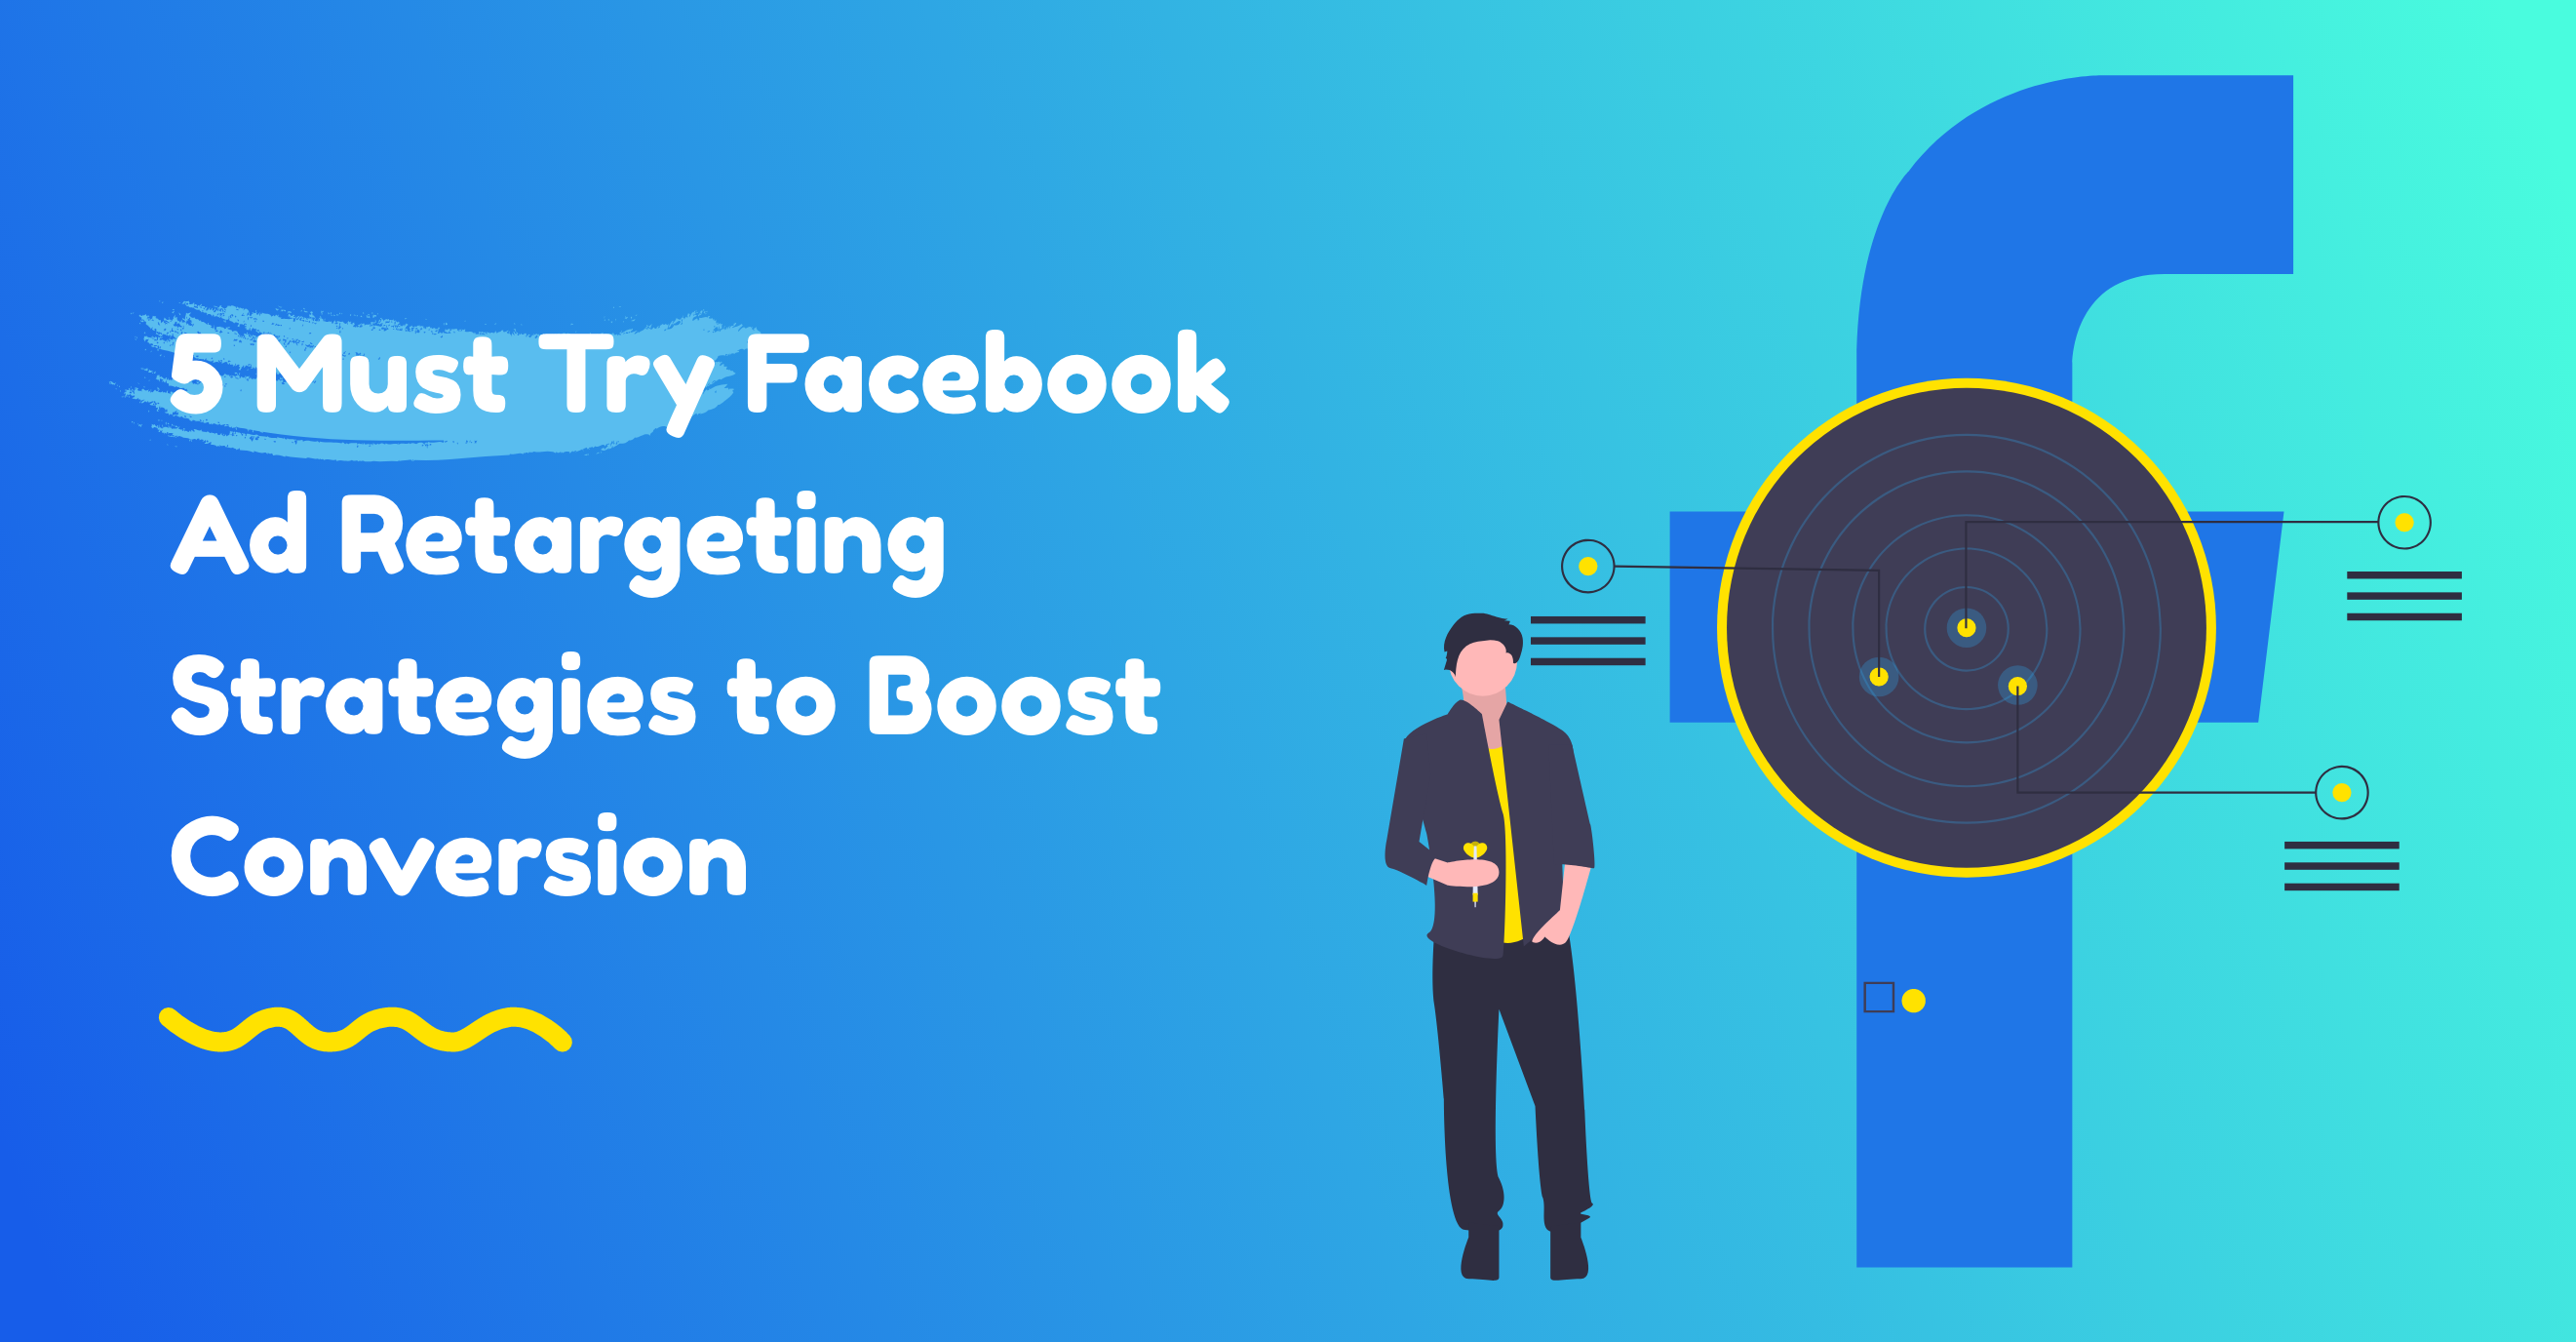 10 Must Try Facebook Ad Retargeting Strategies to Boost Conversion